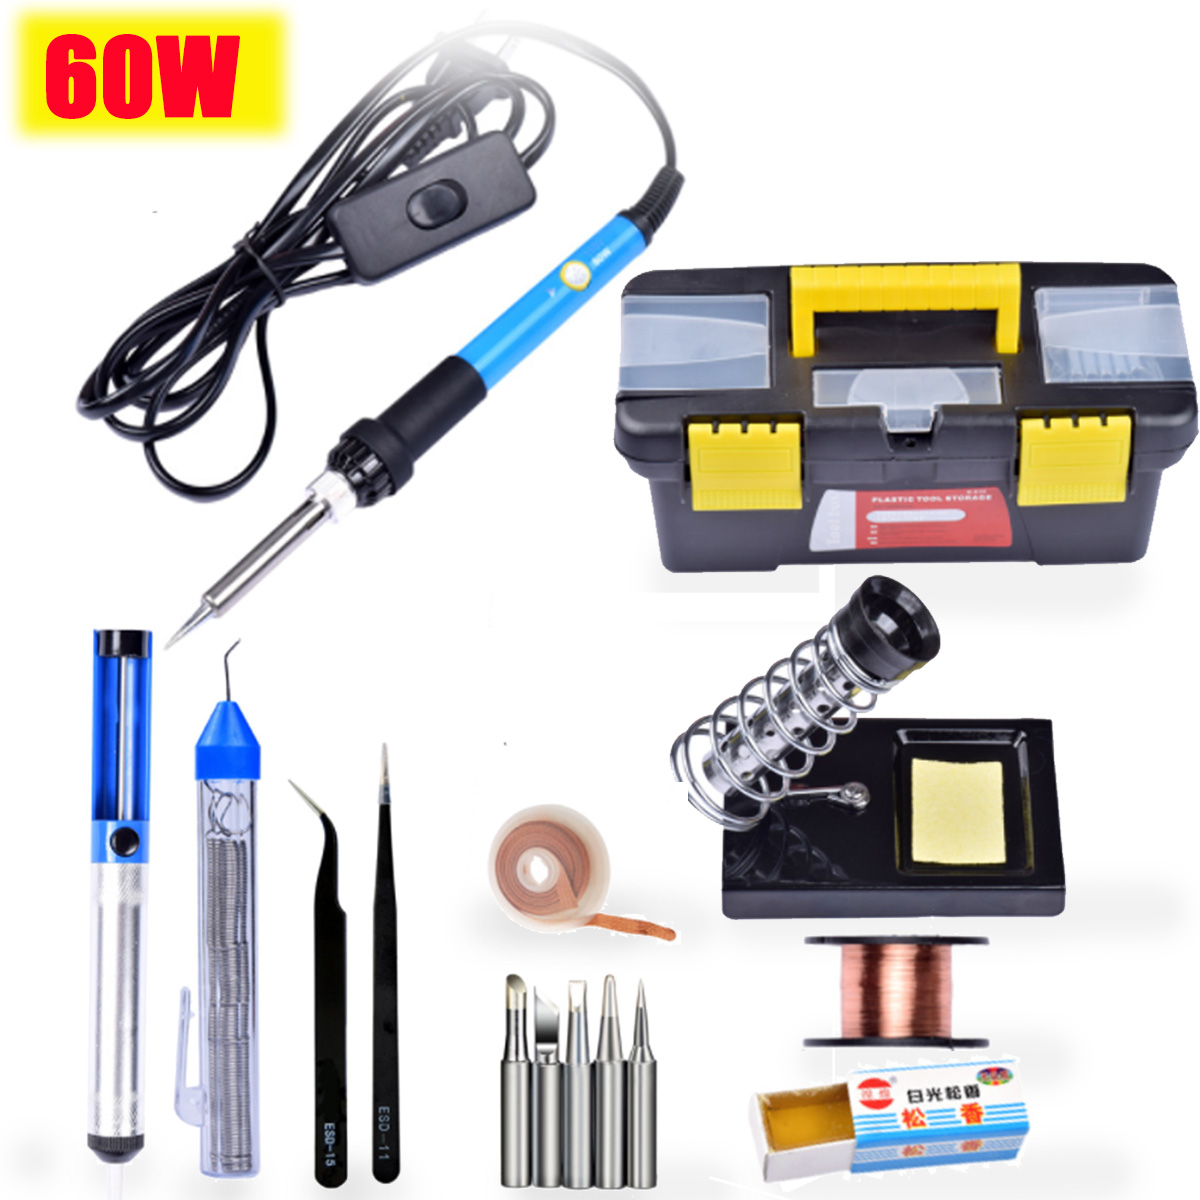 110220V-60W-Adjustable-Temperature-Electric-Welding-Soldering-Tools-Kit-with-Switch-1284249-1